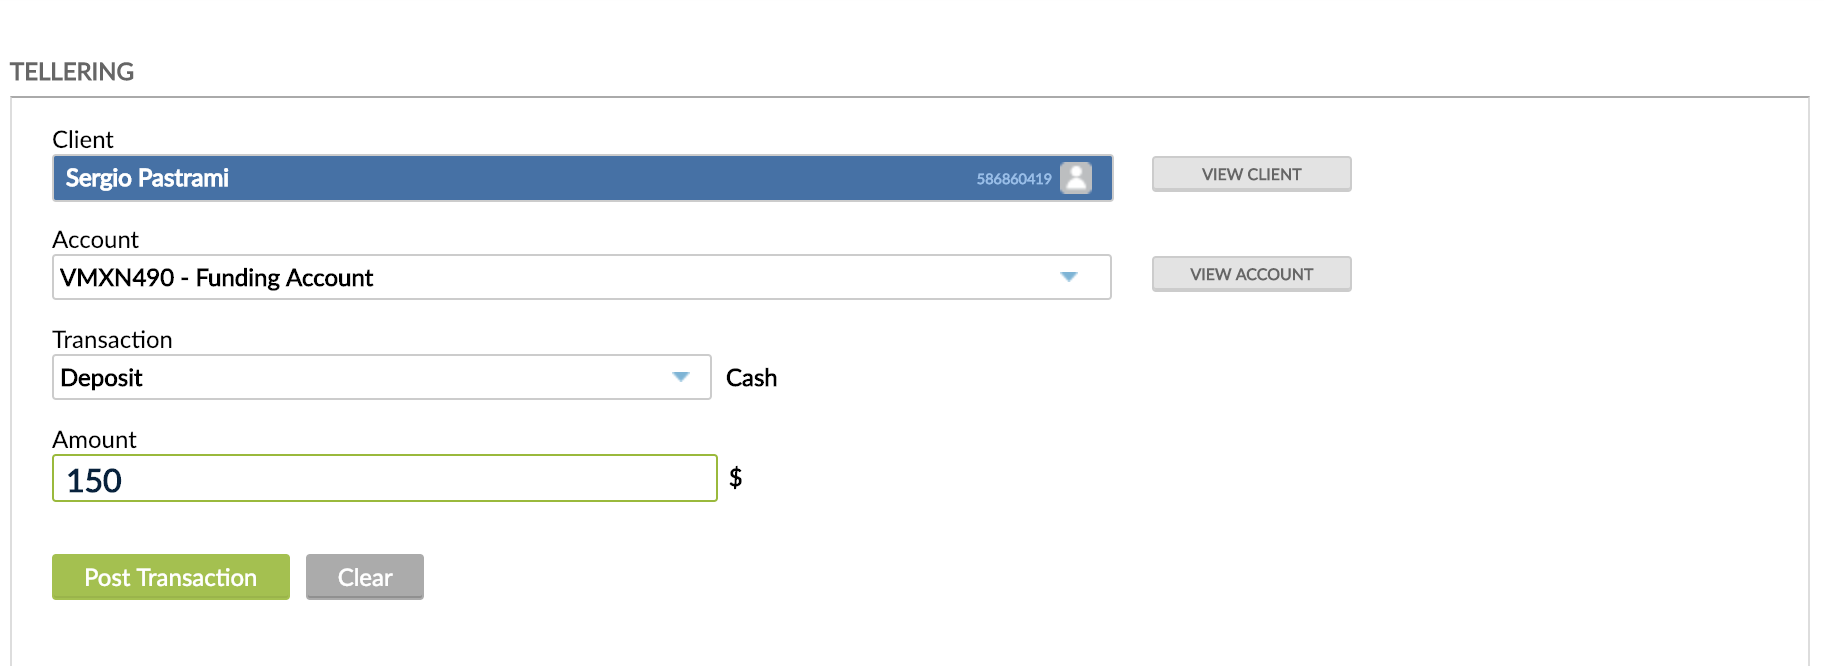 Posting a transaction from the Teller widget where Client, Account, Transaction type and amount fields are displayed